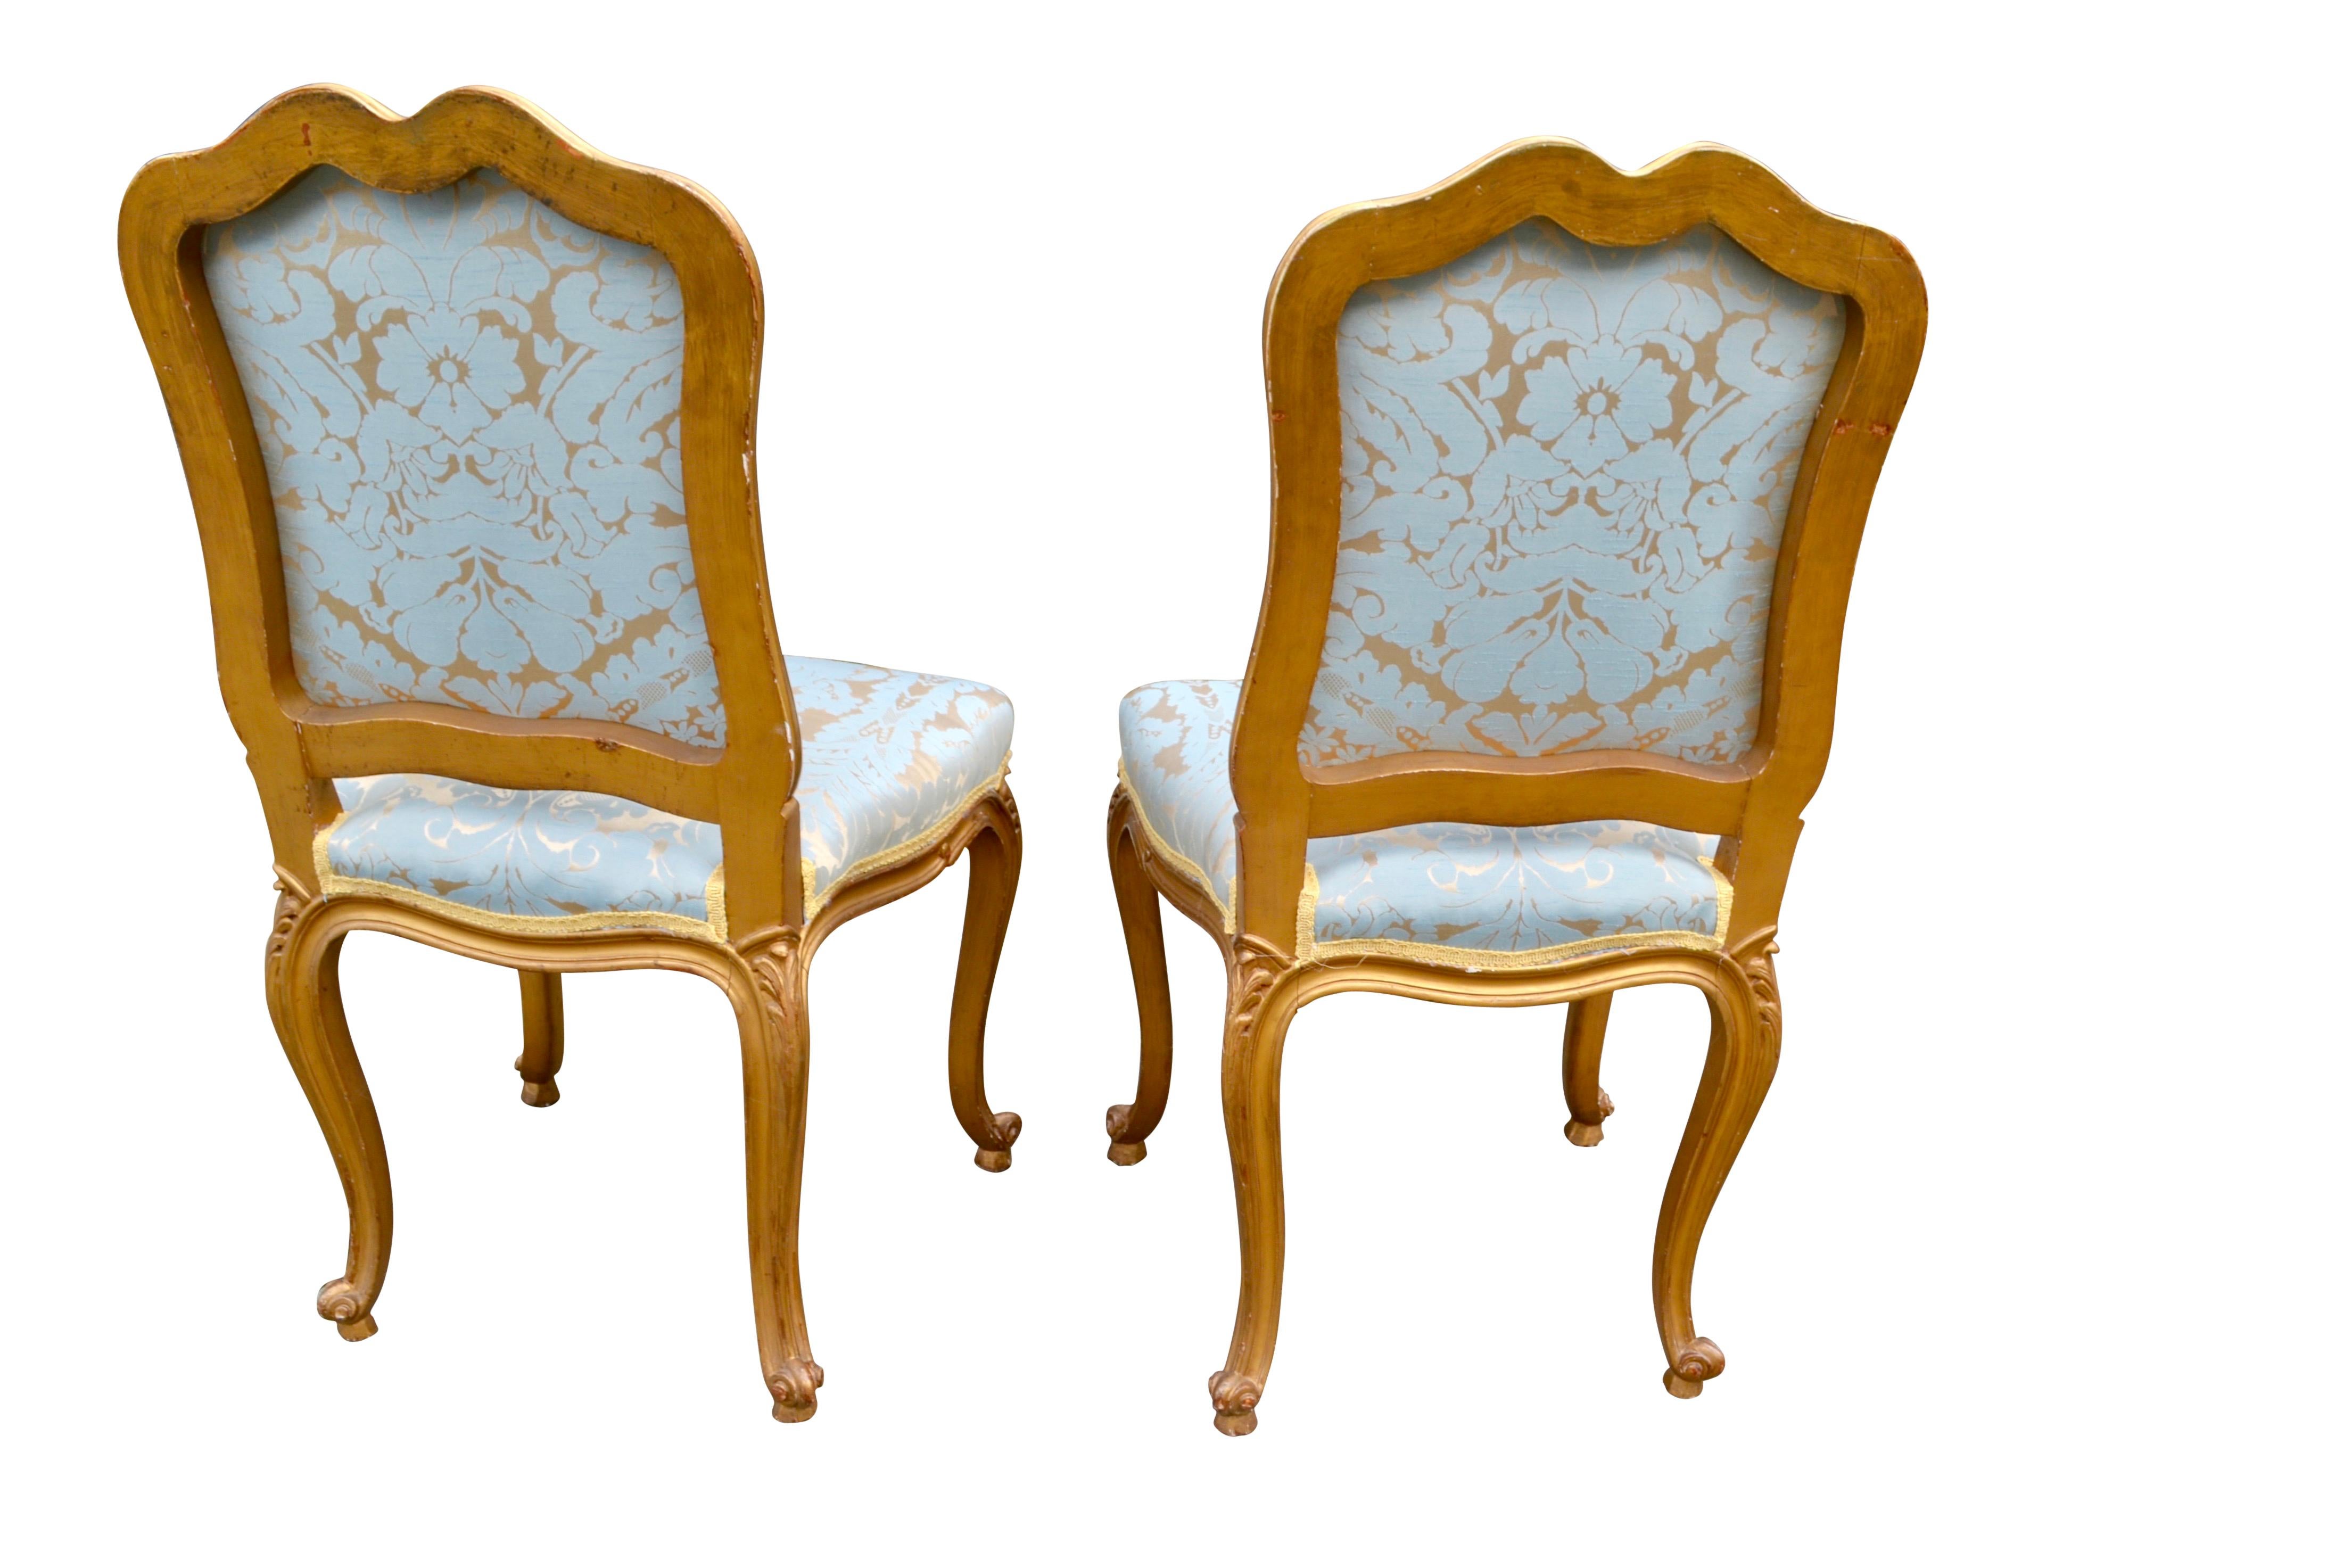 Pair of Louis XV Style Gilded Side Chairs In Good Condition For Sale In Vancouver, British Columbia